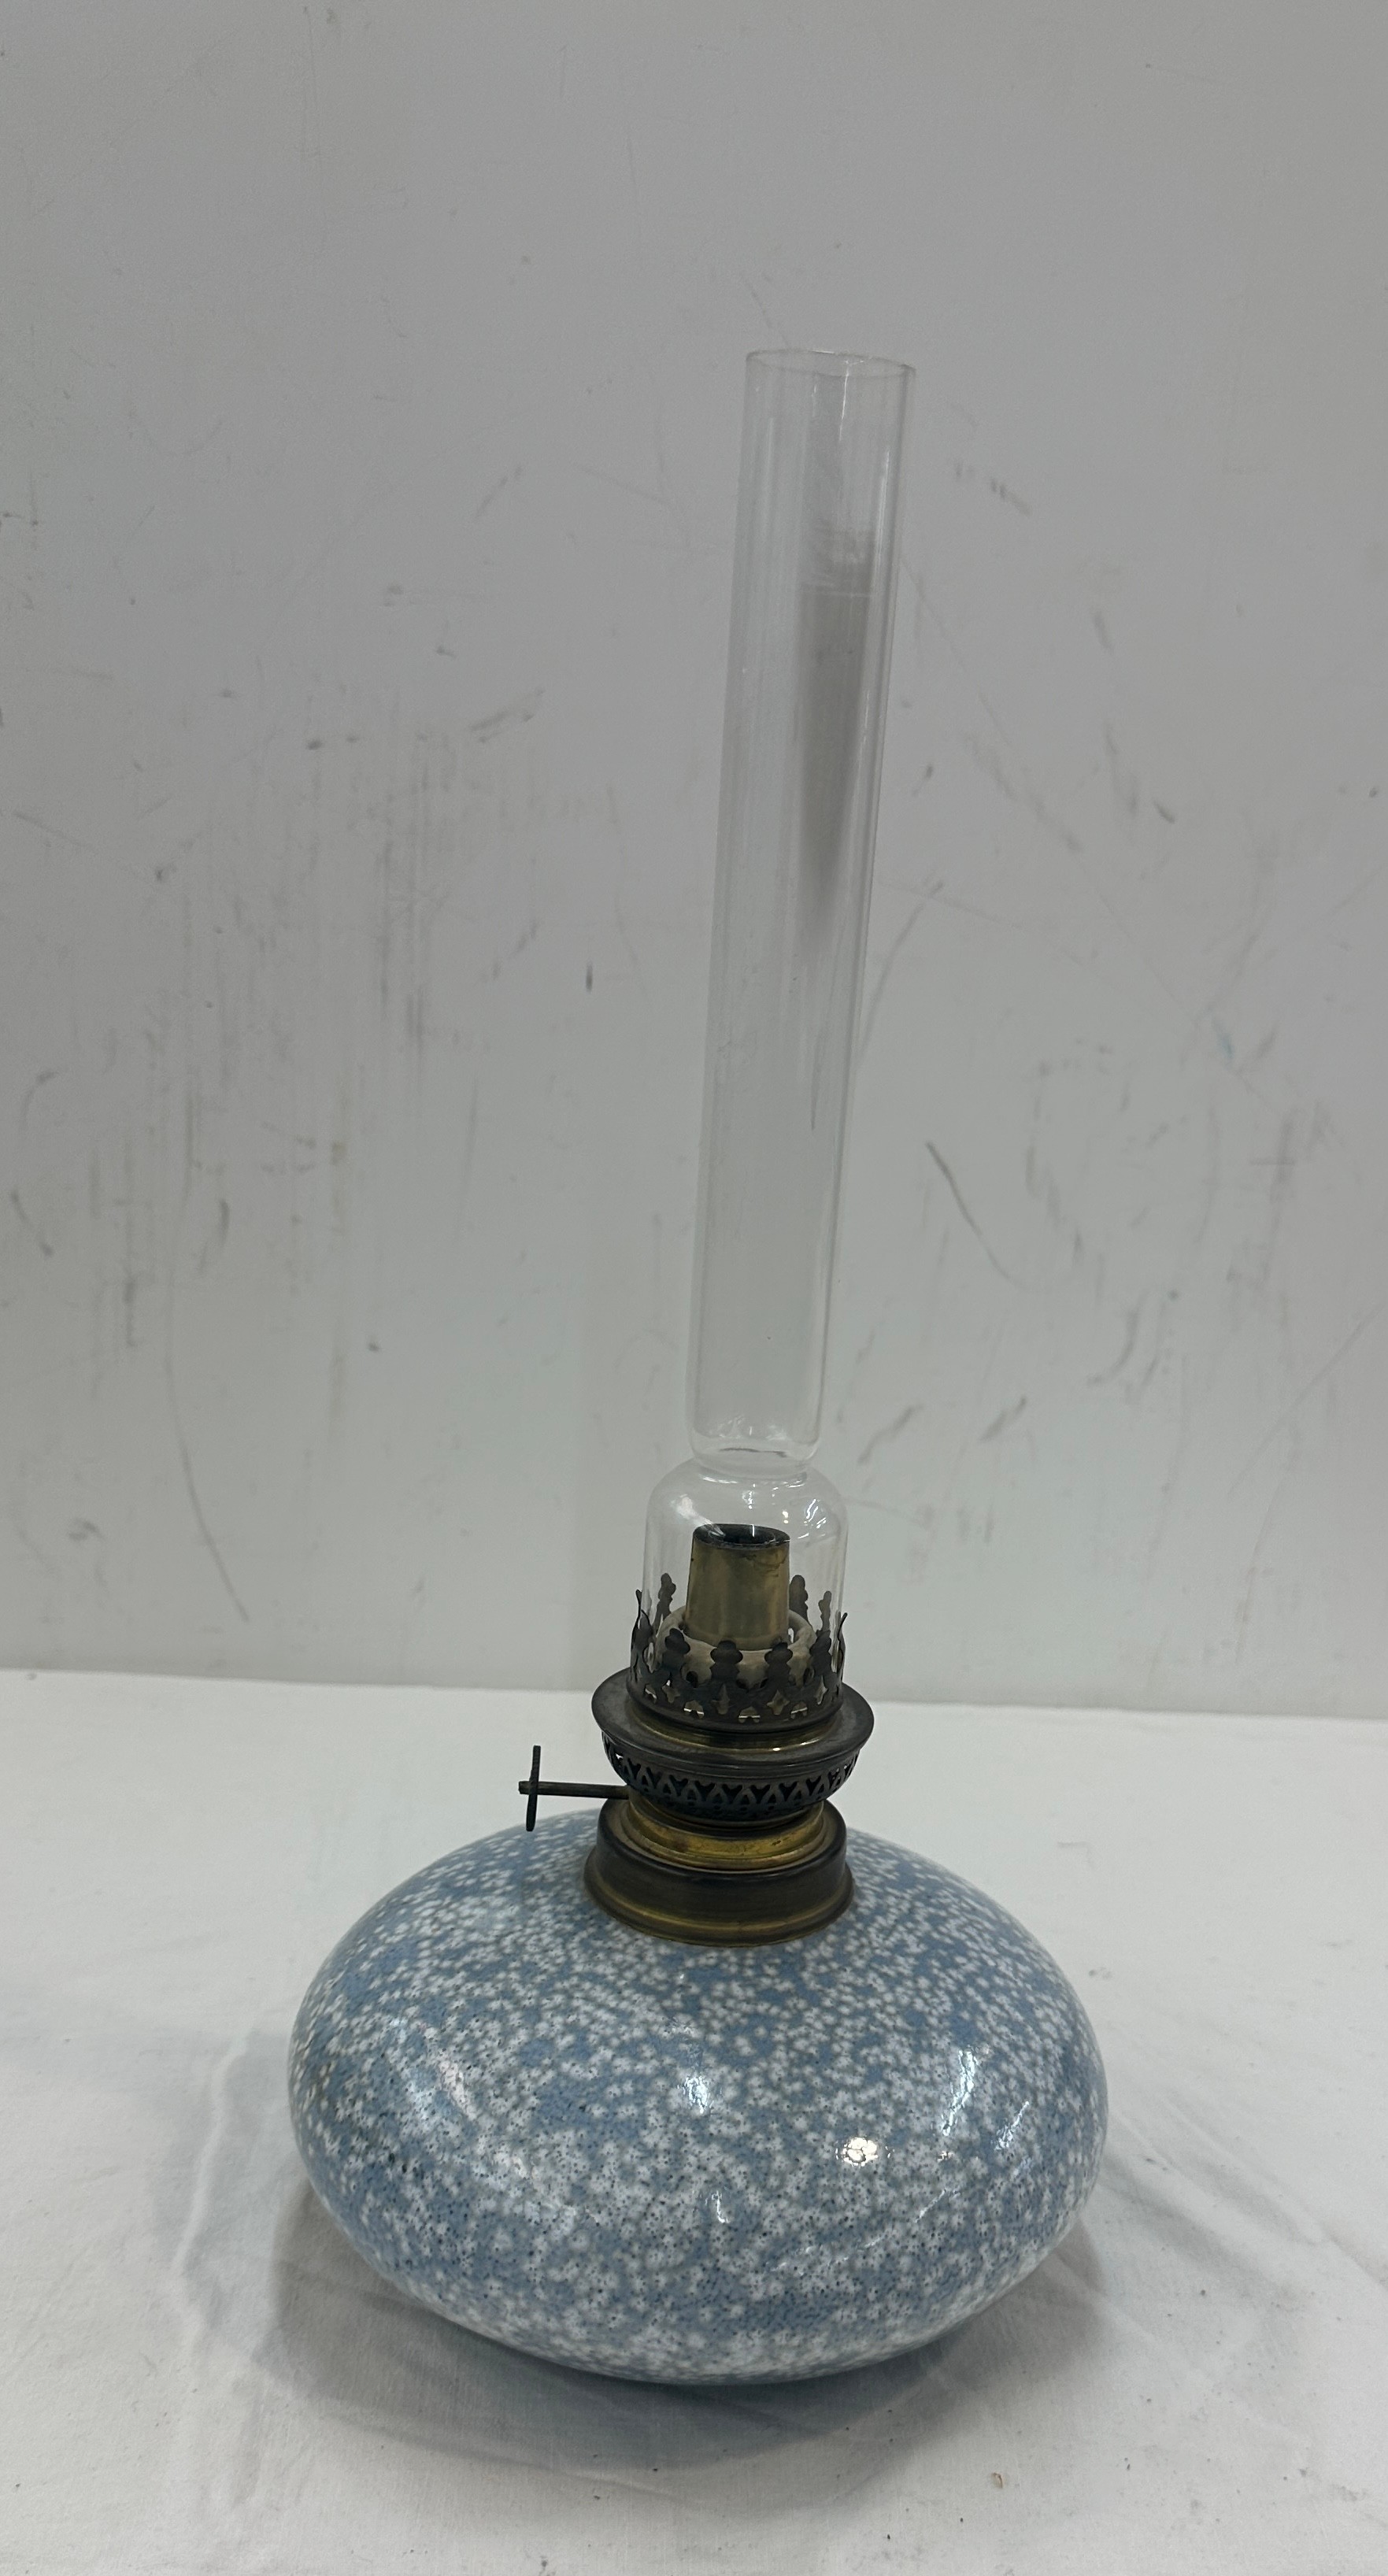 Vintage oil lamp and funnel, height including funnel 17 inches tall - Bild 4 aus 4